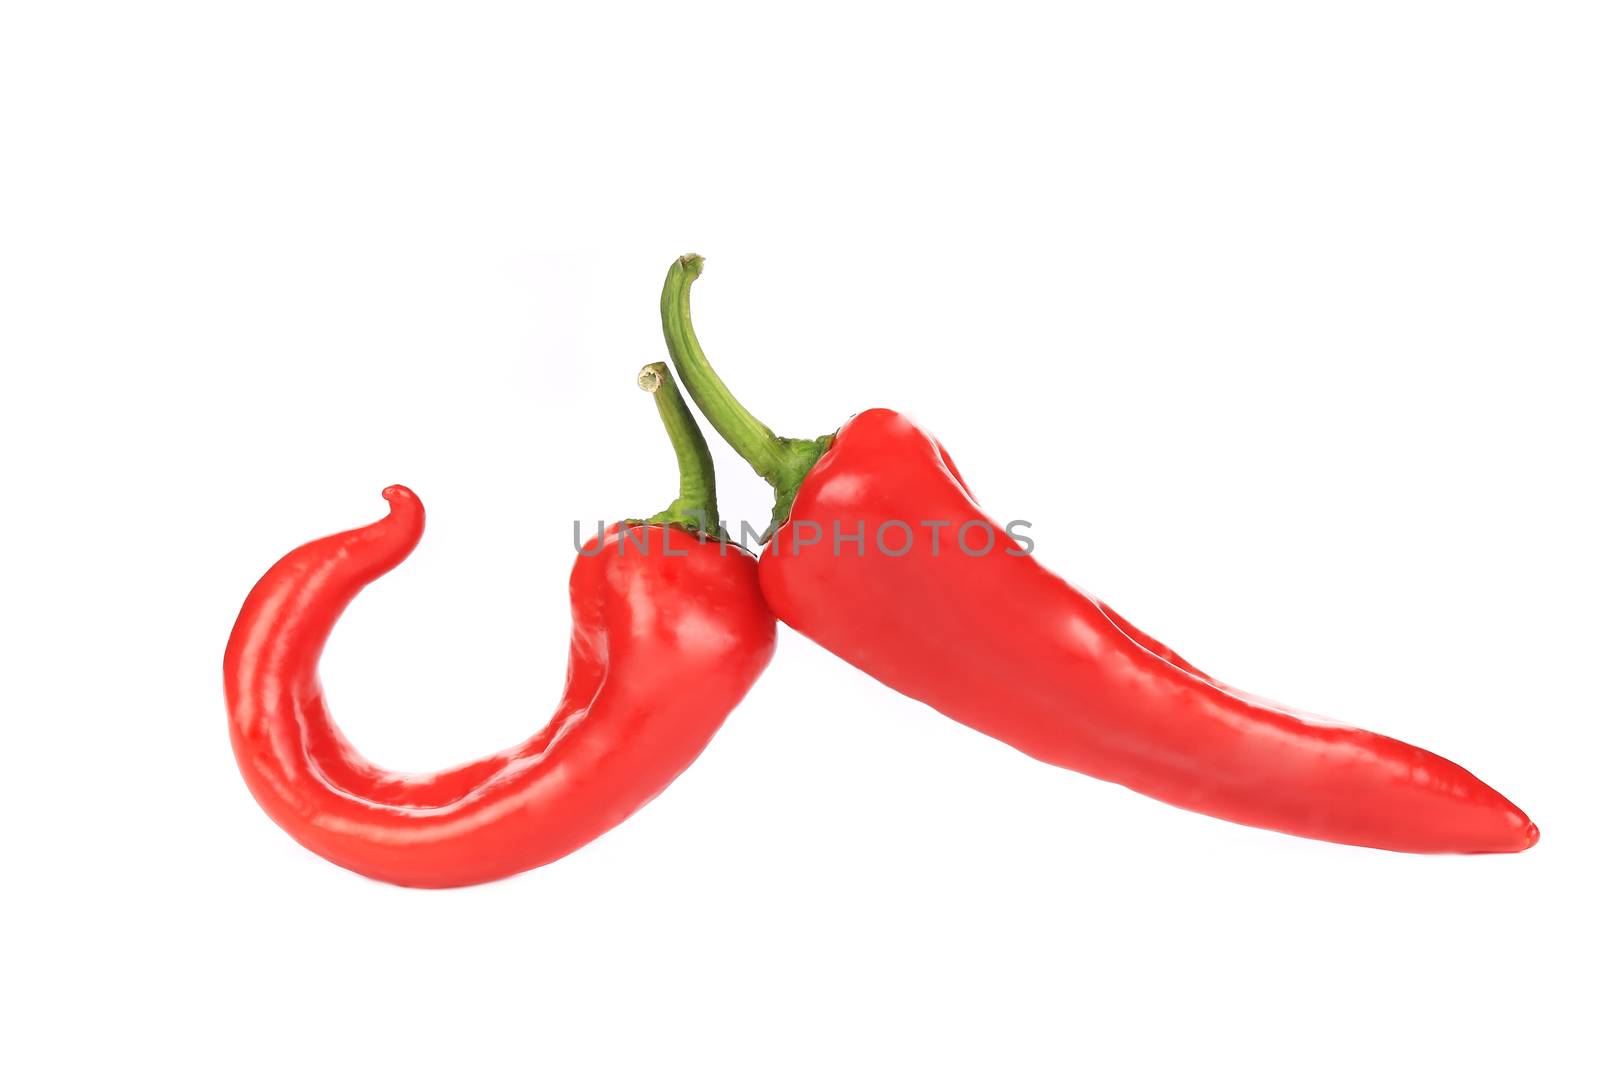 Two red chili peppers. Isolated on a white background.